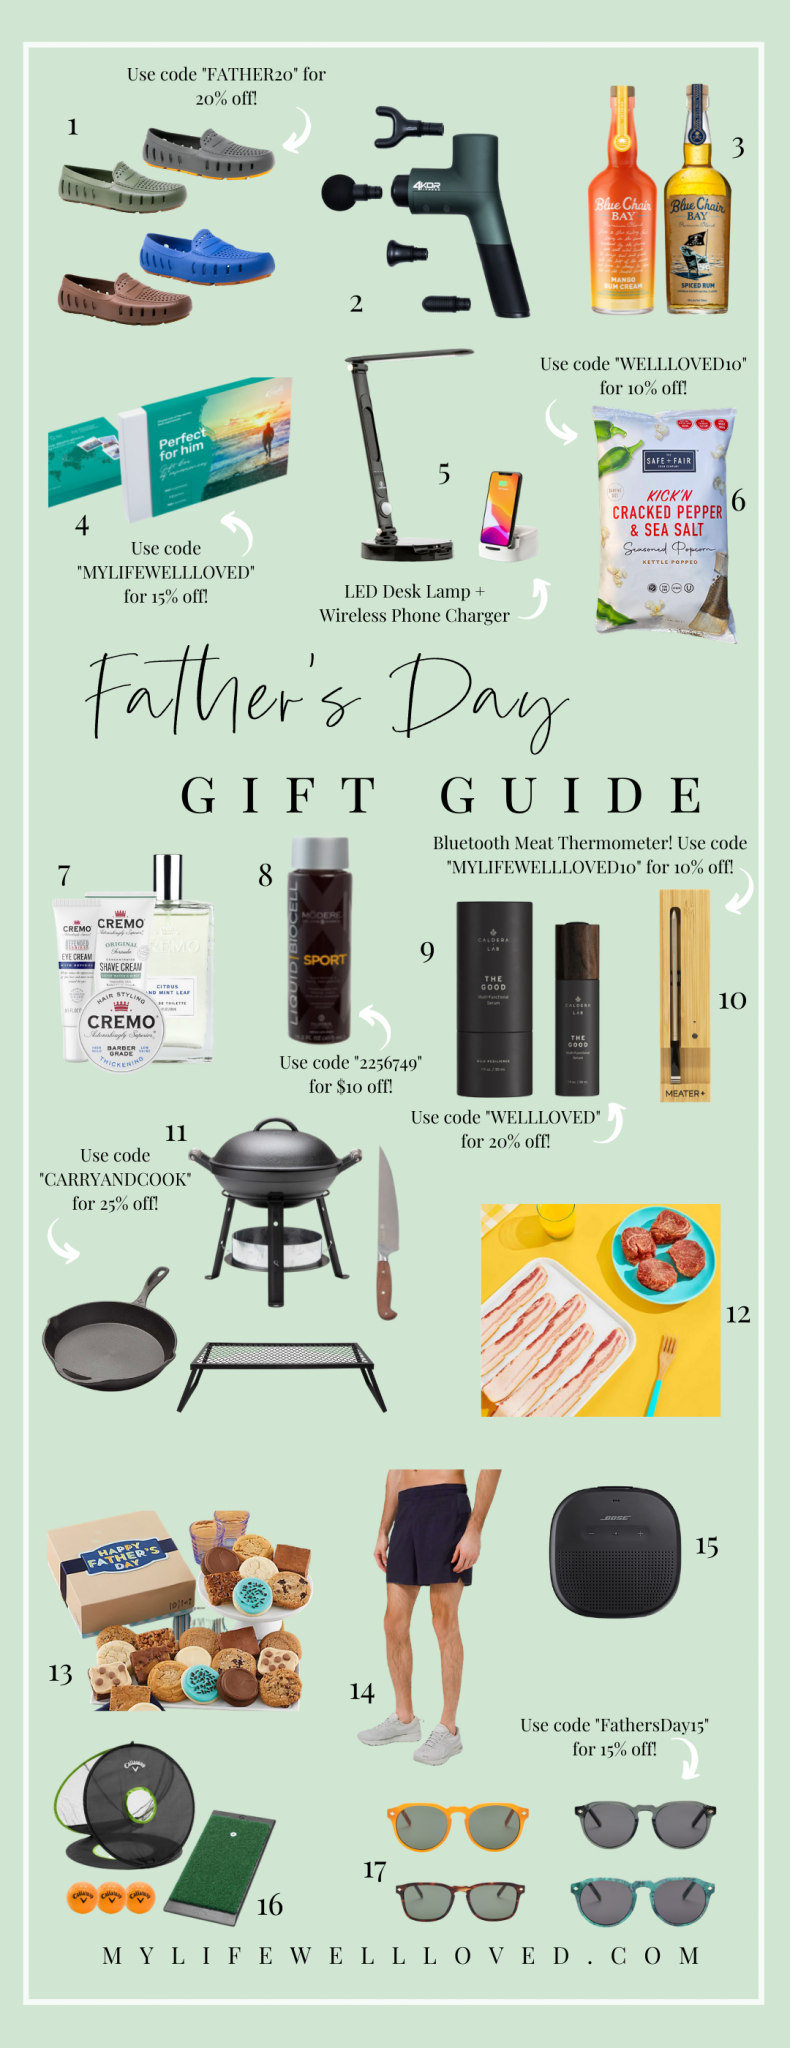 https://www.mylifewellloved.com/wp-content/uploads/GG-fathers-day-2.png